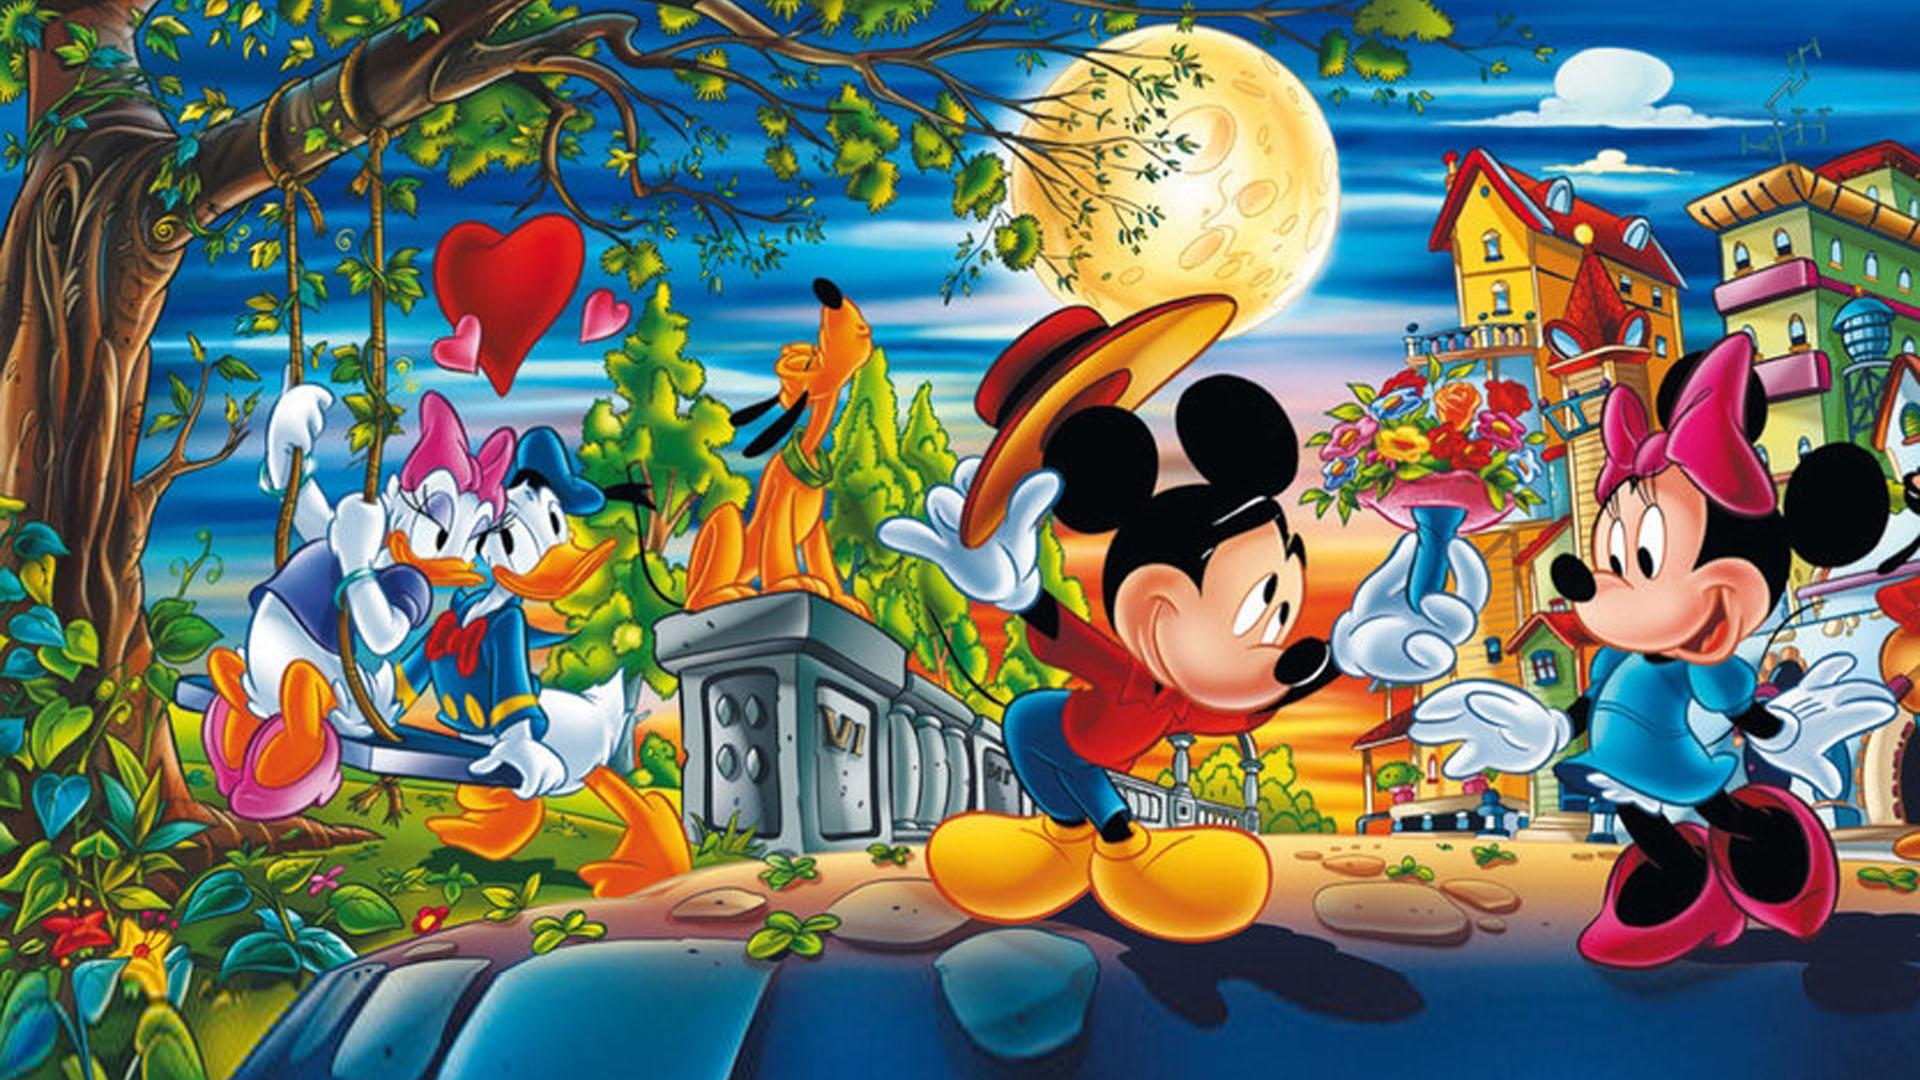 Valentine Day Cartoons Mickey With Minnie Mouse And Donald With Daisy Duck Disney Picture Love Couple Wallpaper HD 1920x1080, Wallpaper13.com